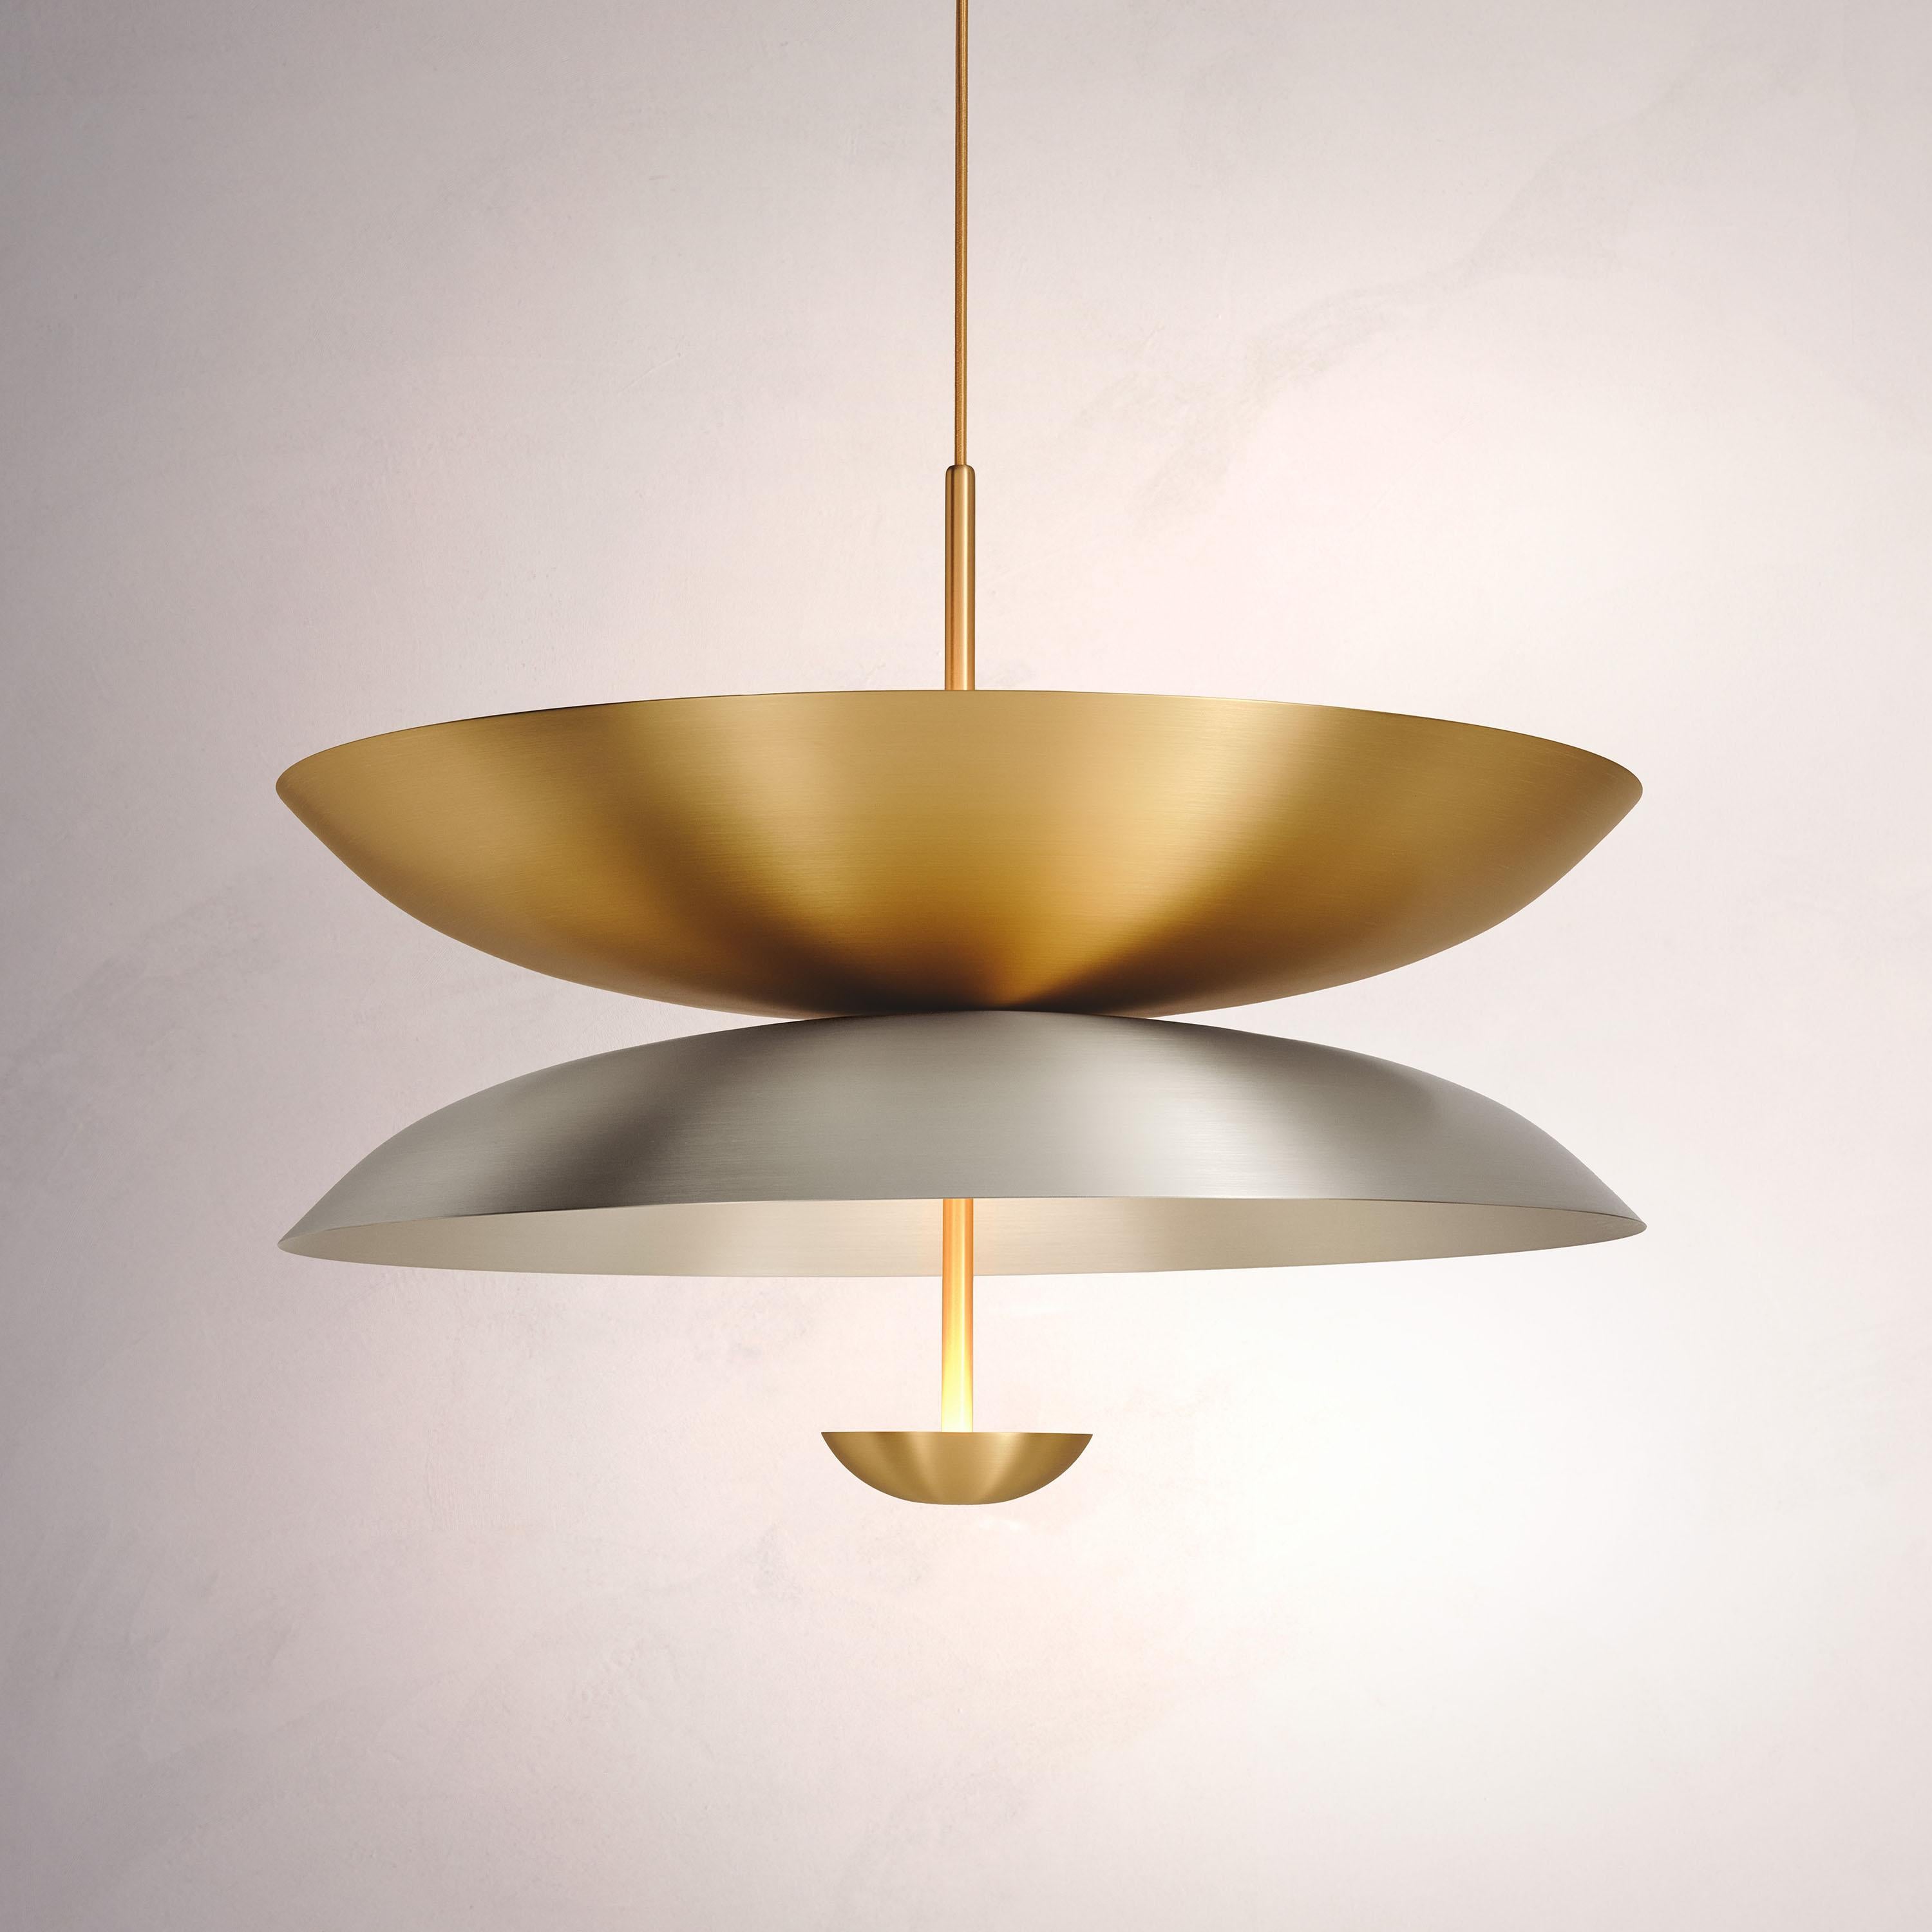 Inspired by planet-like shapes and textures, the Cosmic collection plays with both metal properties and a selection of patina finishes.
 
The Pendant Duo Seleno Sol is composed of three carefully hand-spun steel and brass plates and preserves the